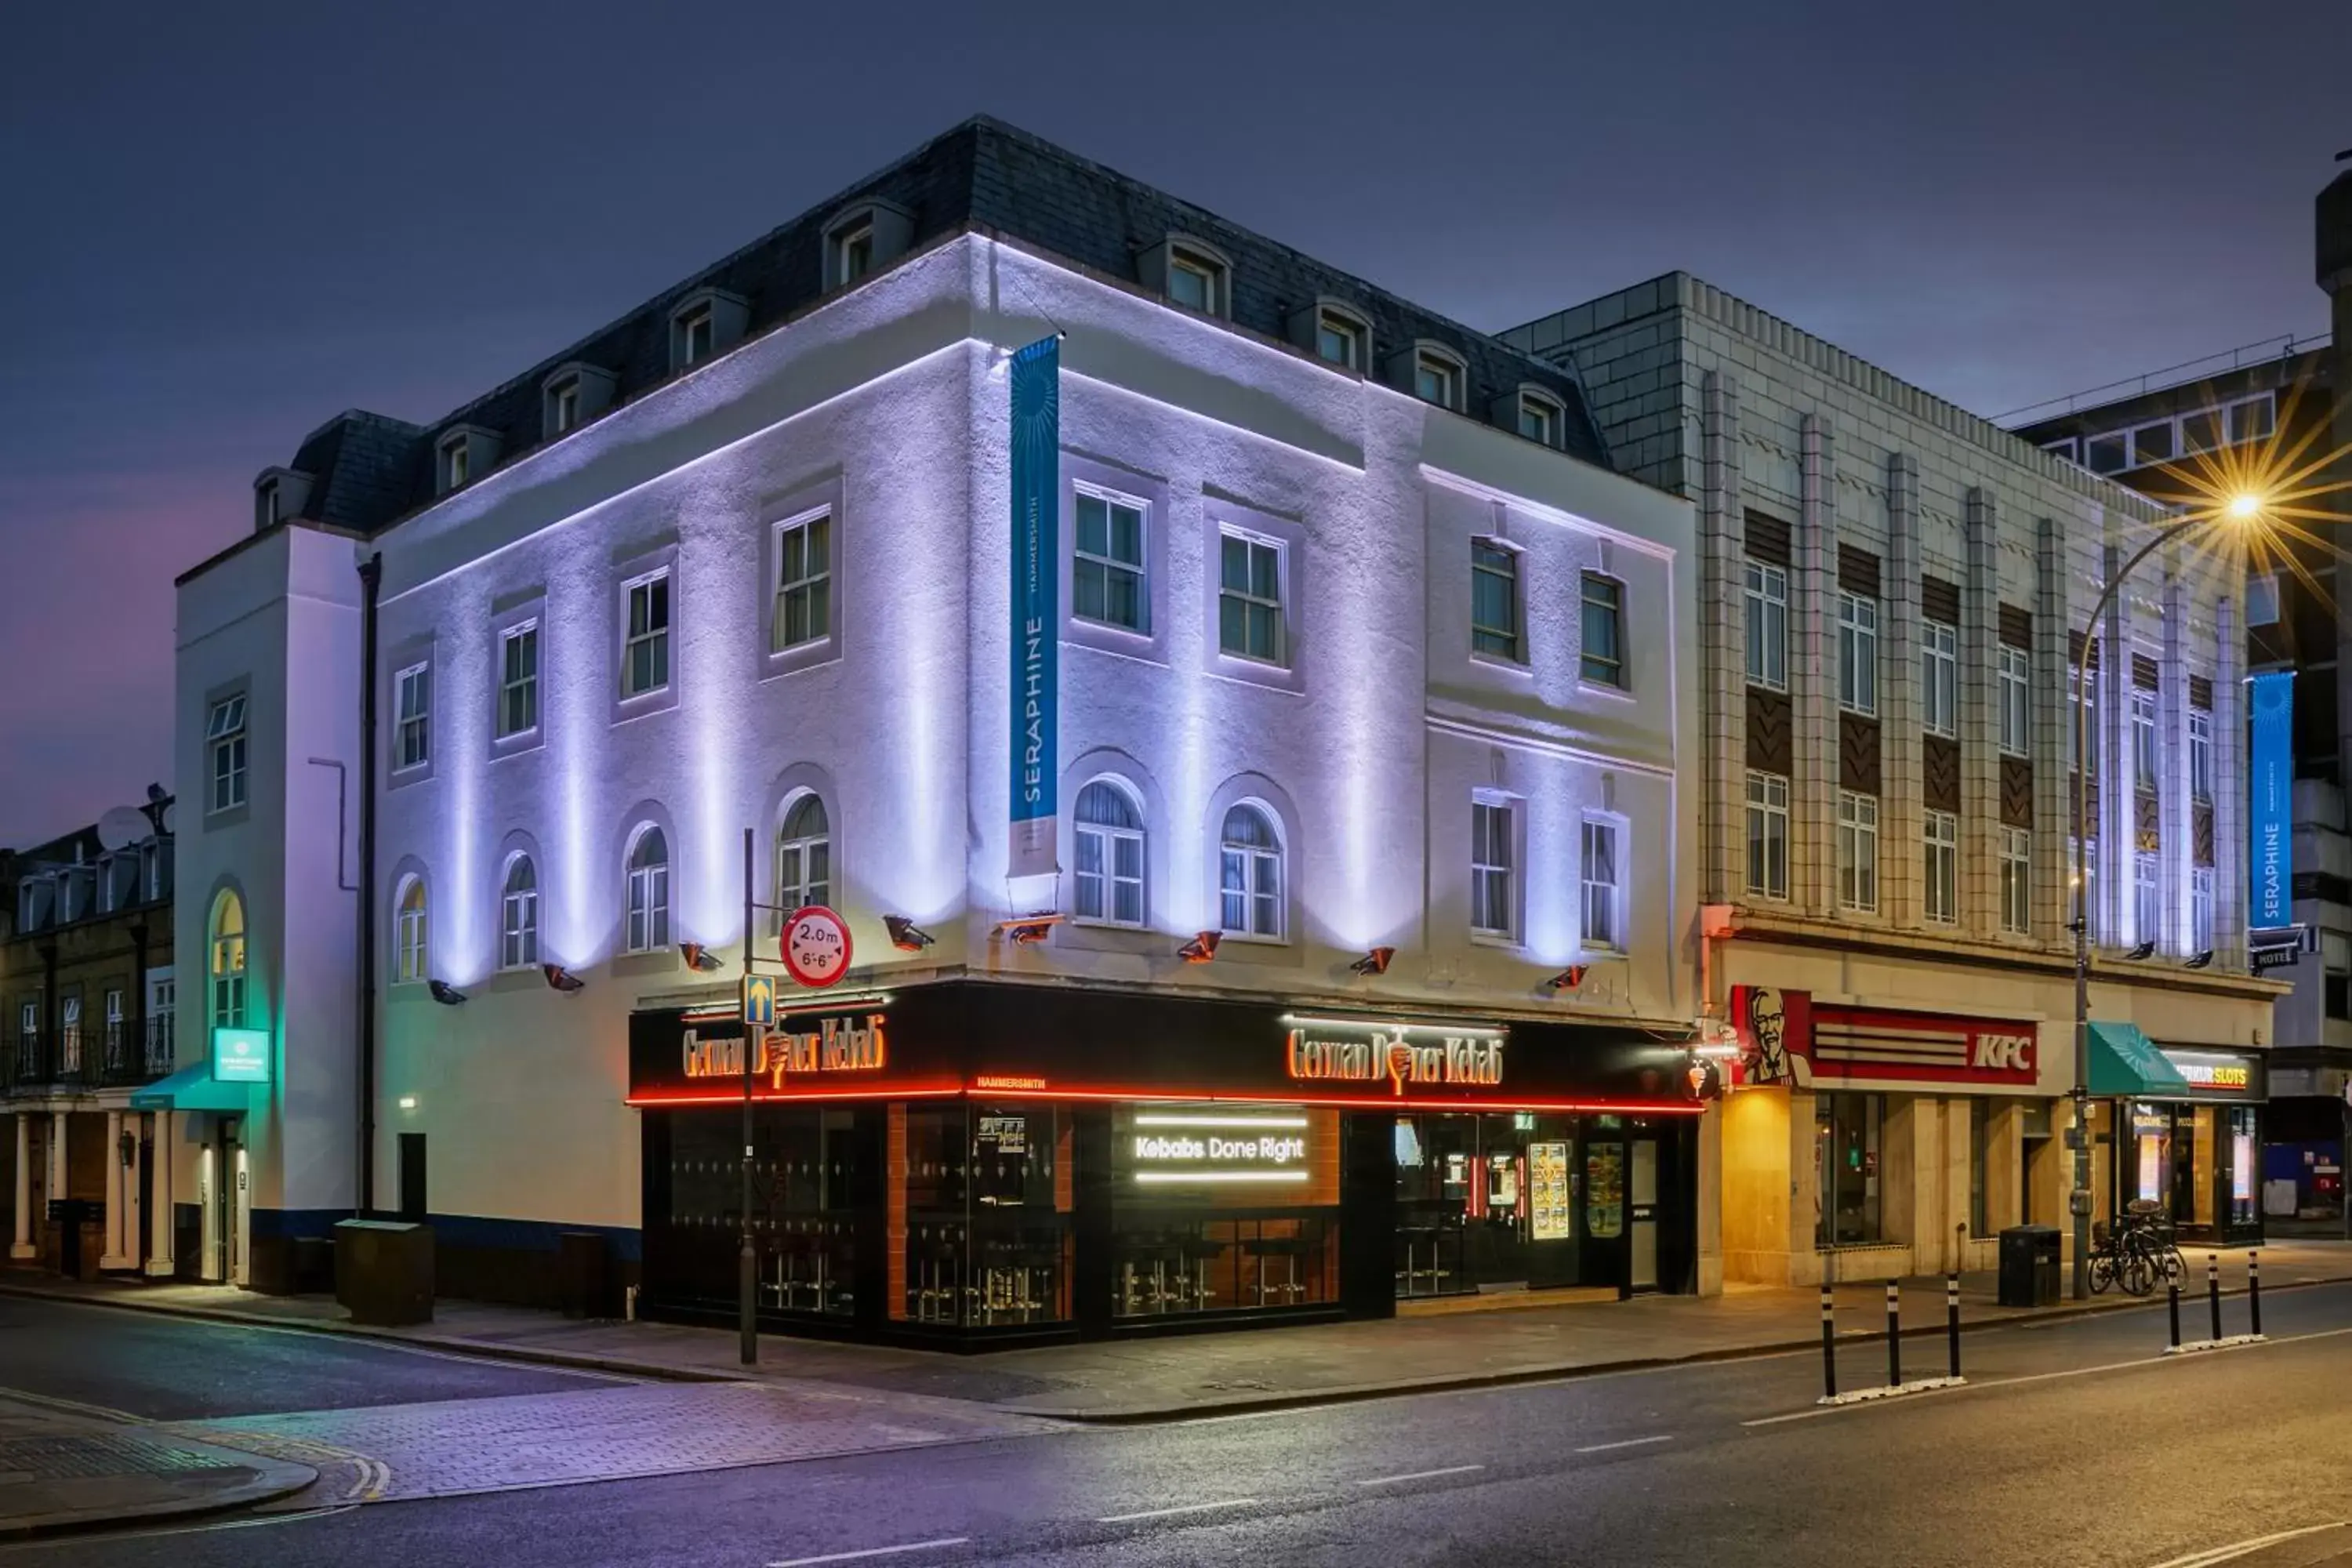 Property Building in Seraphine Hammersmith Hotel